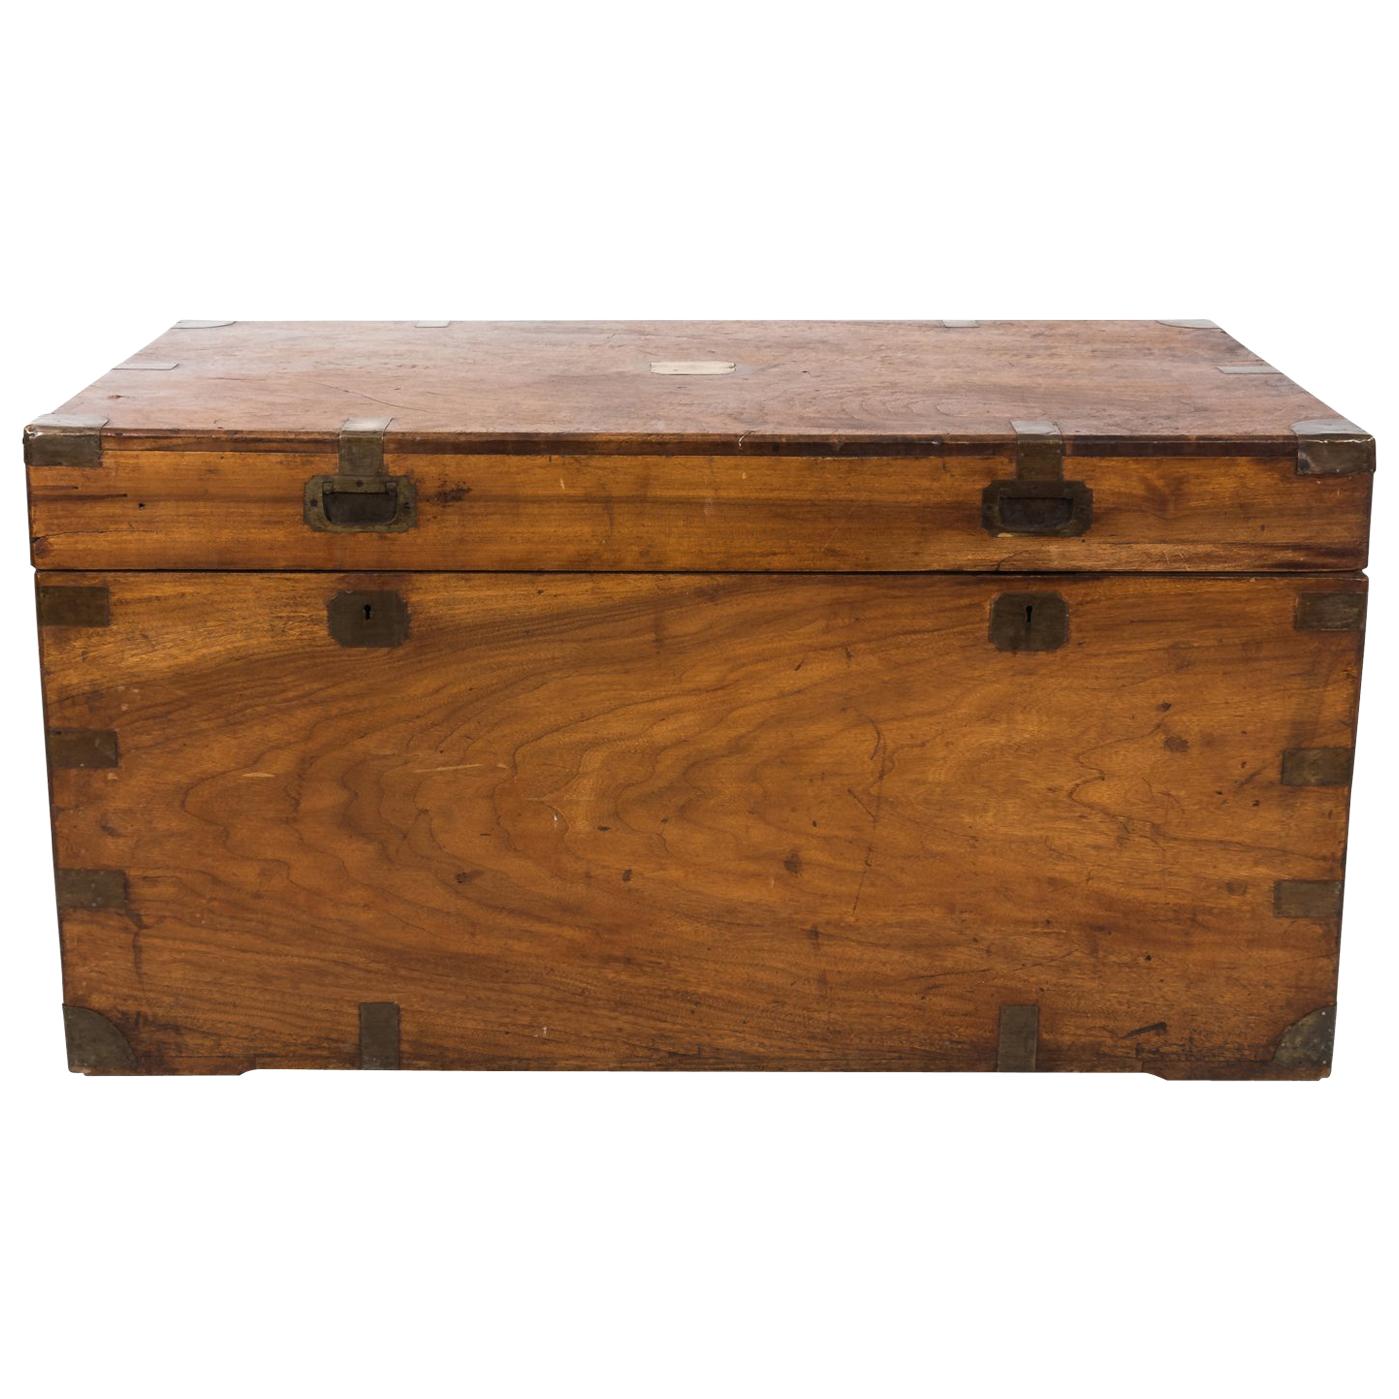 1870s Camphor Wood and Brass Military Campaign Trunk